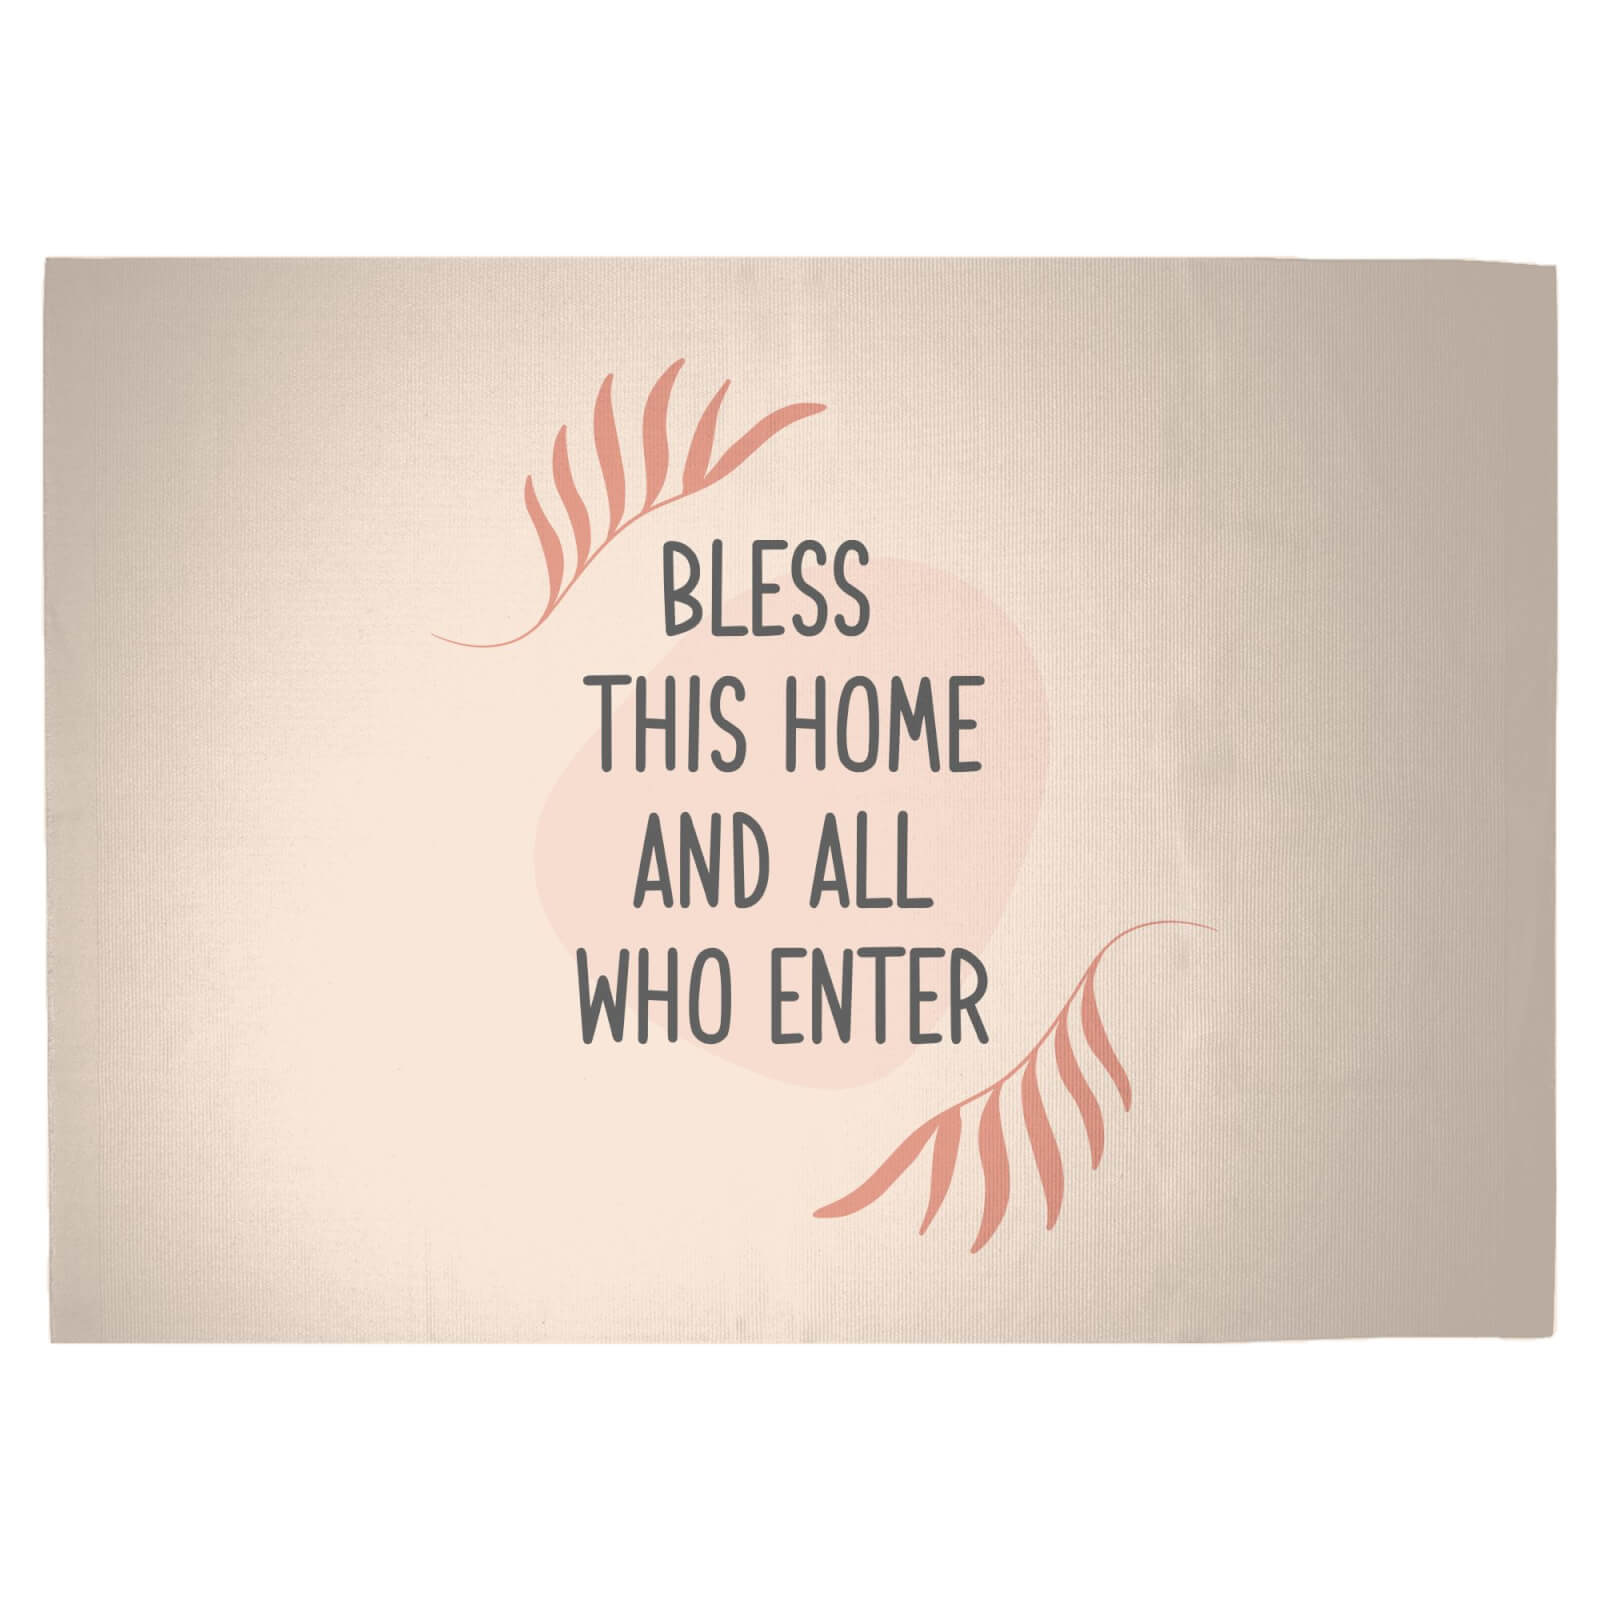 Bless This Home Woven Rug - Large